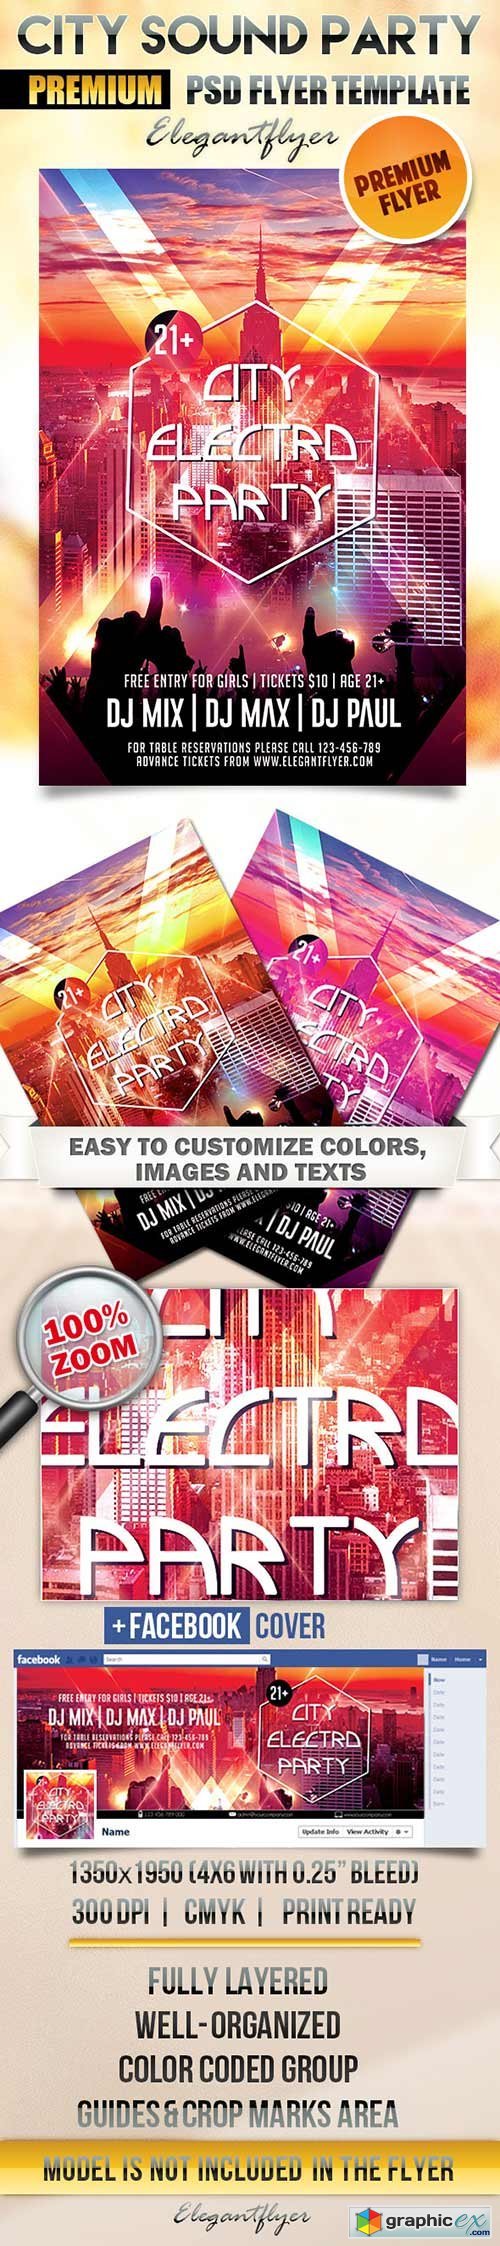 City Sound Party Flyer PSD Template + Facebook Cover